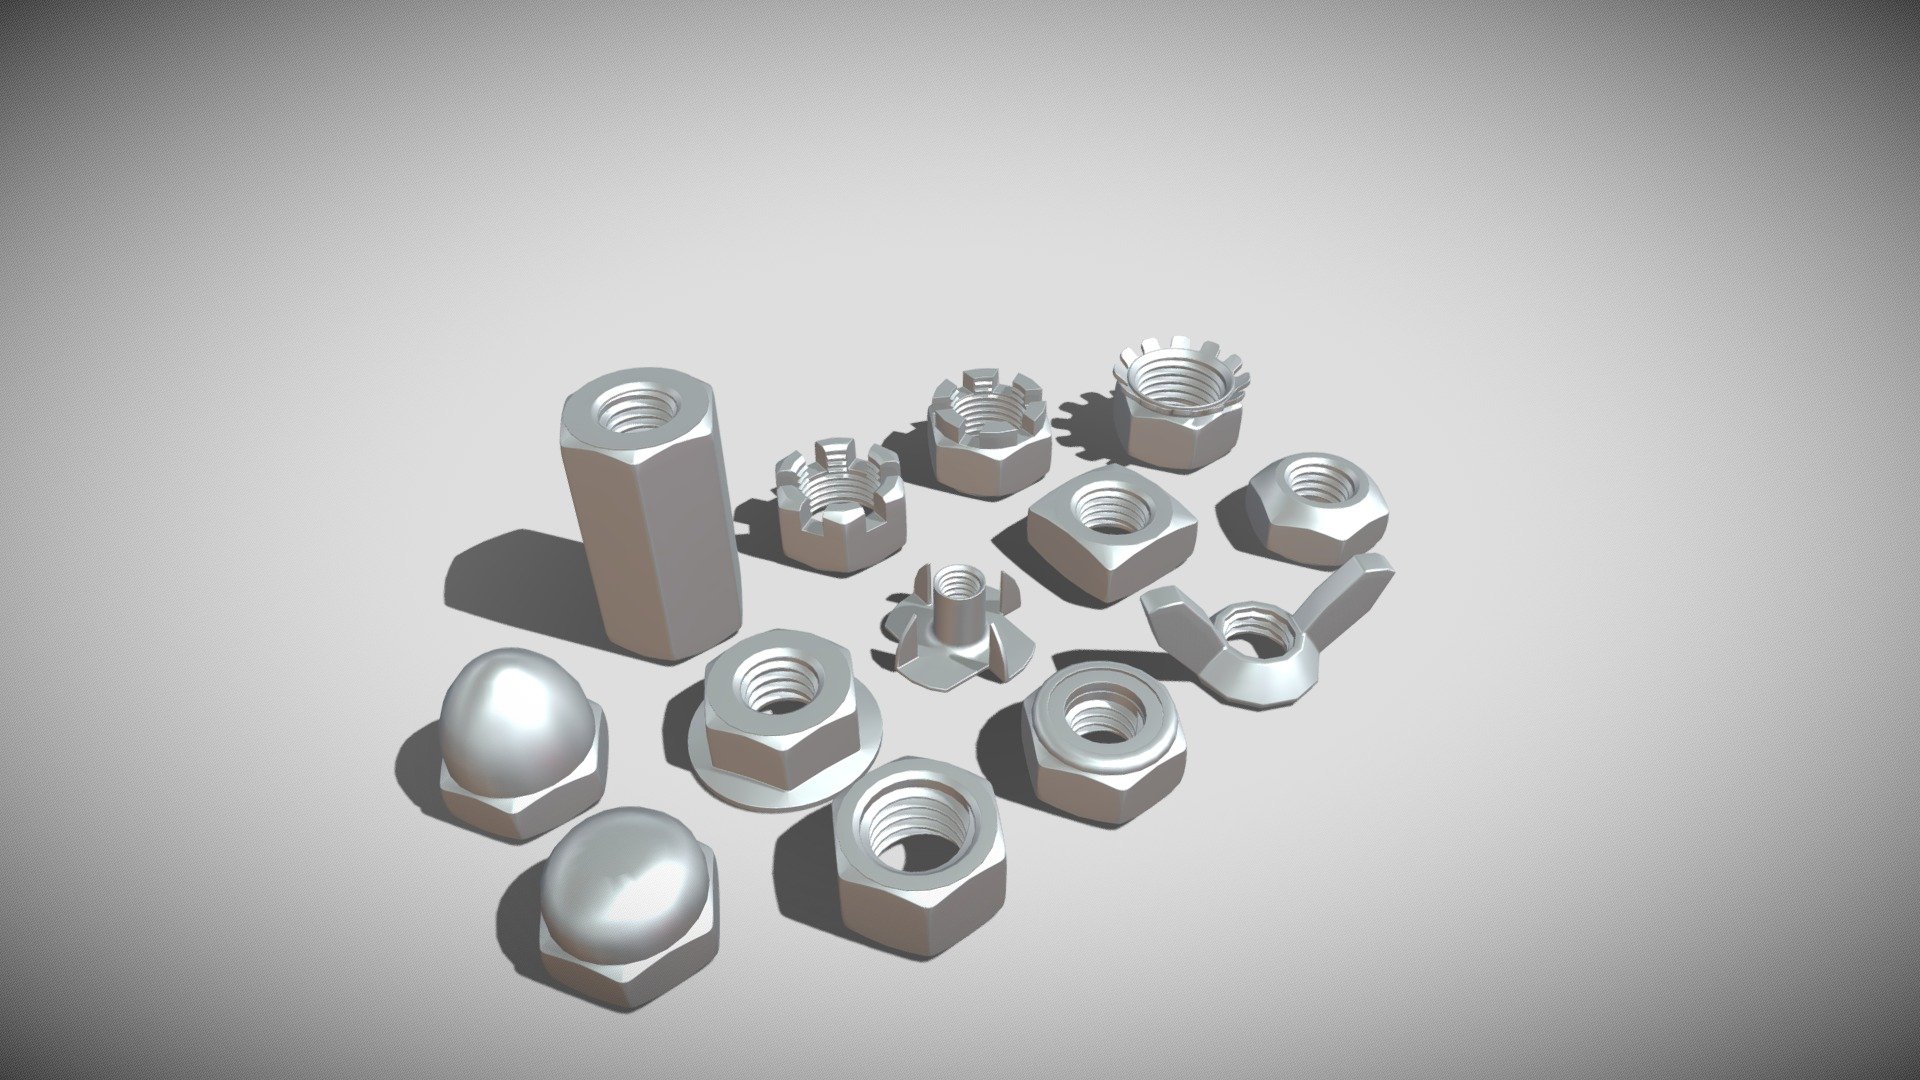 This pack contains 13 detailed models of different types of nuts, modeled in Cinema 4D and rendered using the physical renderer. The models were created using approximate real world dimensions.

All models are subdivision ready.

The poly count of the individual nuts are as follows:

Finished Hexagon Nut: Polys - 1728; Vertices - 1722

Nylon Insert Lock Nut: Polys - 1968; Vertices - 1968

Wing Nut: Polys - 660; Vertices - 650

Cap Nut: Polys - 1608; Vertices - 1604

Acorn Nut: Polys - 1656; Vertices - 1628

Flange Nut: Polys - 1632; Vertices - 1656

Pronged Tee Nut: Polys - 2320; Vertices - 2290

Square Nut: Polys - 1344; Vertices - 1338

Prevailing Torque Lock Nut: Polys - 1584; Vertices - 1578

Kep Nut: Polys - 3810; Vertices - 3756

Coupling Nut: Polys - 5092; Vertices - 5087

Slotted Nut: Polys - 2520; Vertices - 2535

Castle Nut: Polys - 2847; Vertices - 2875

An additional file has been provided containing the original Cinema 4D project files and other 3d export files such as 3ds, fbx and obj 3d model